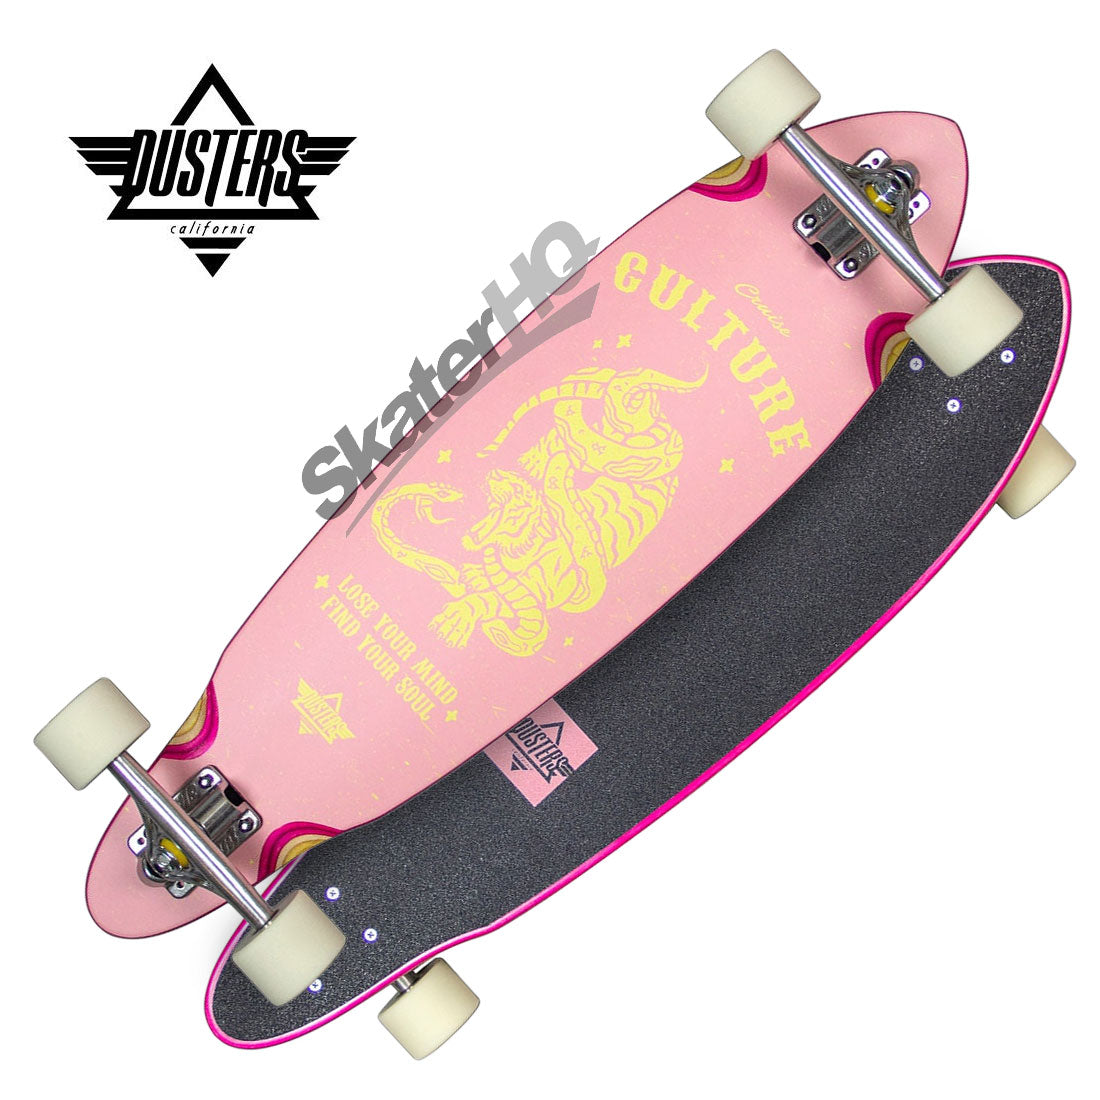 Dusters Culture 33 Longboard Complete - Pink/Yellow Skateboard Completes Longboards